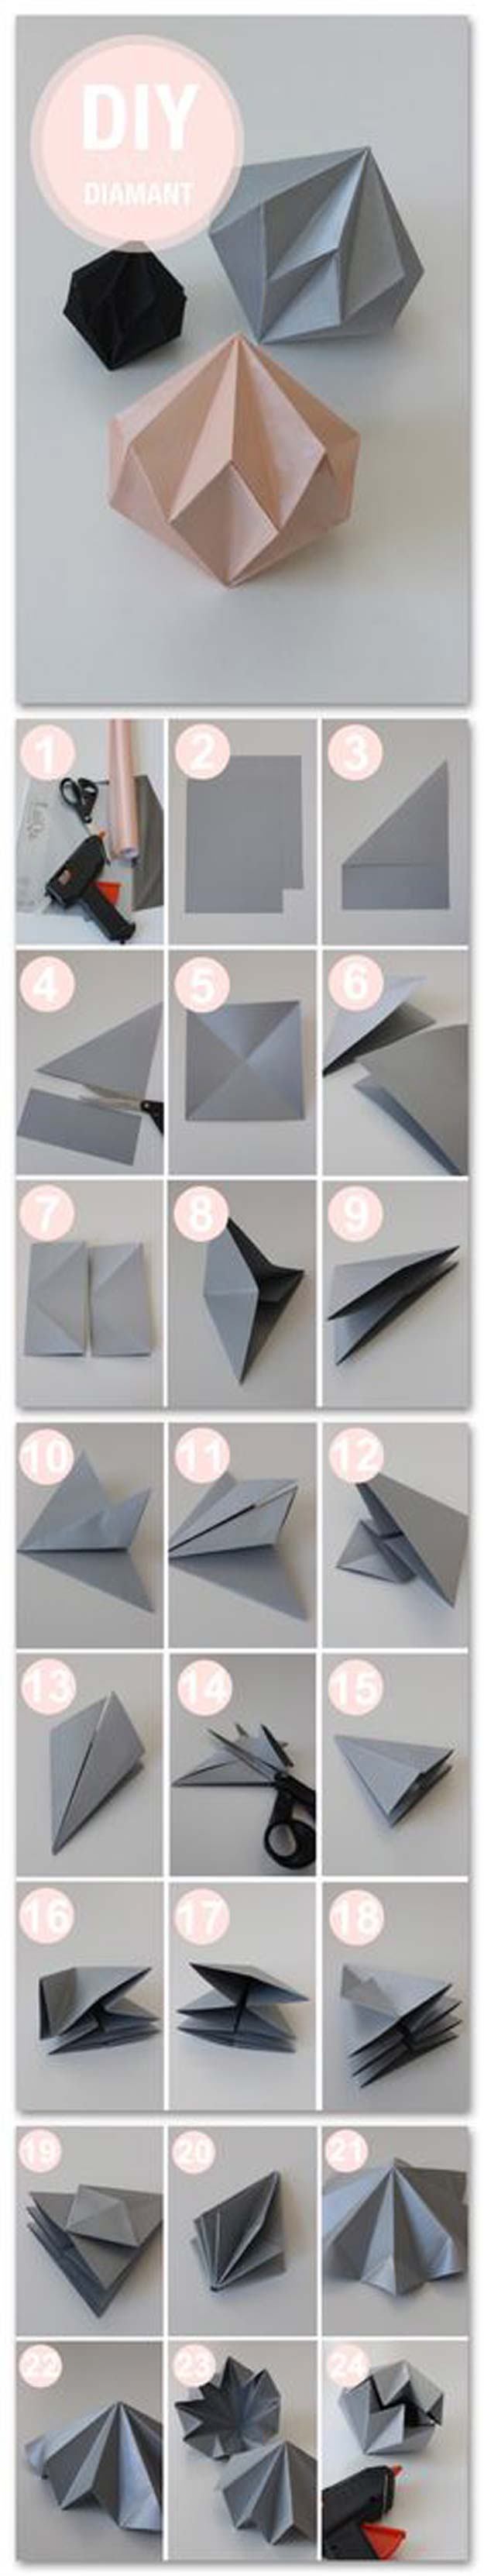 Best Origami Tutorials - Diamant - Easy DIY Origami Tutorial Projects for With Instructions for Flowers, Dog, Gift Box, Star, Owl, Buttlerfly, Heart and Bookmark, Animals - Fun Paper Crafts for Teens, Kids and Adults #origami #crafts